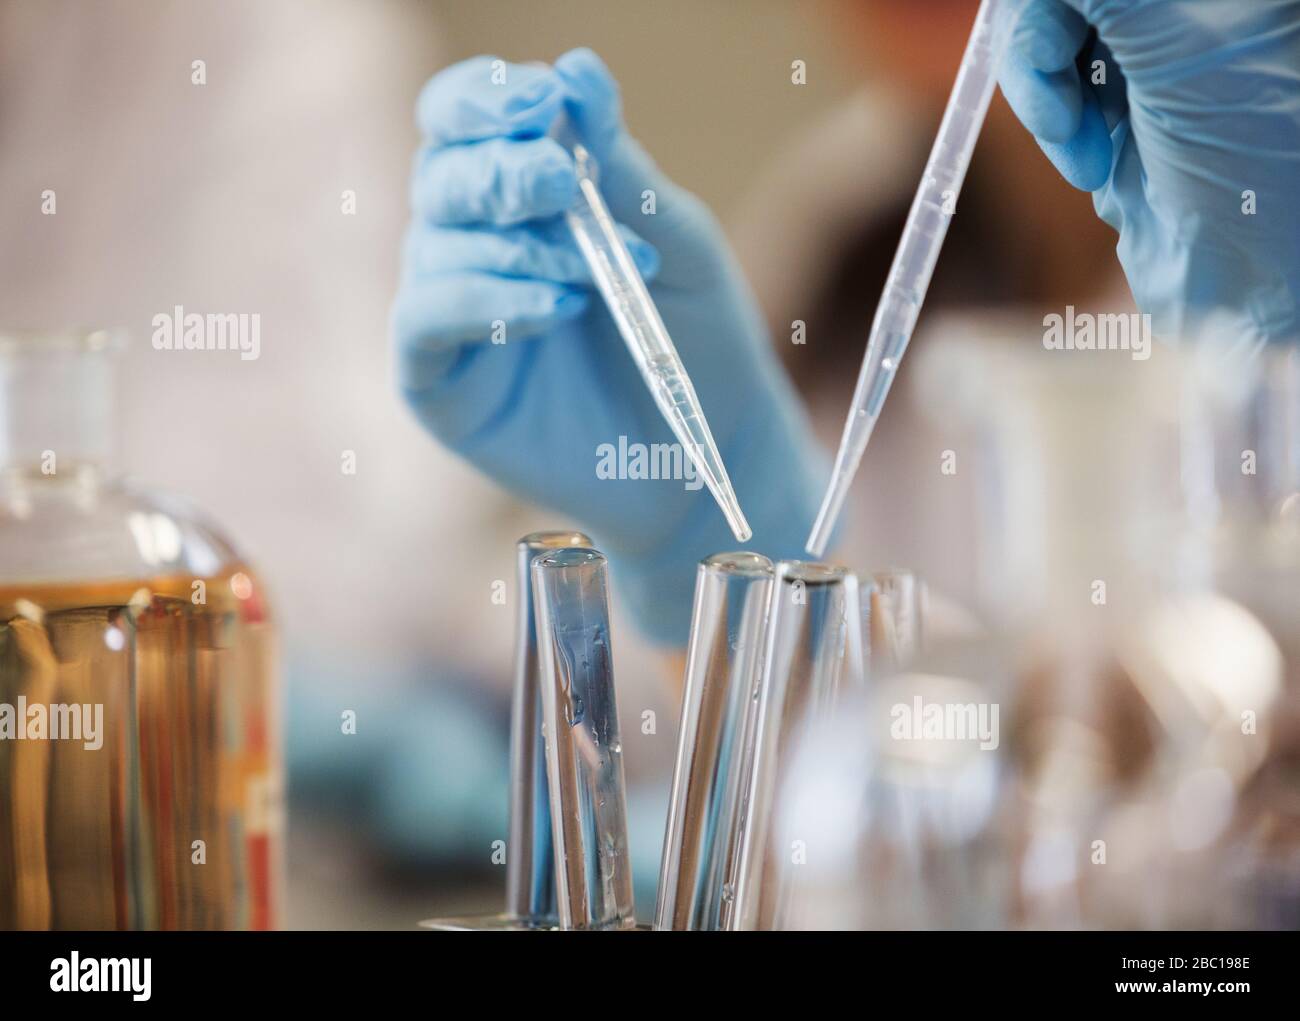 Hands in rubber gloves using pipettes over test tubes, conducting scientific experiment Stock Photo